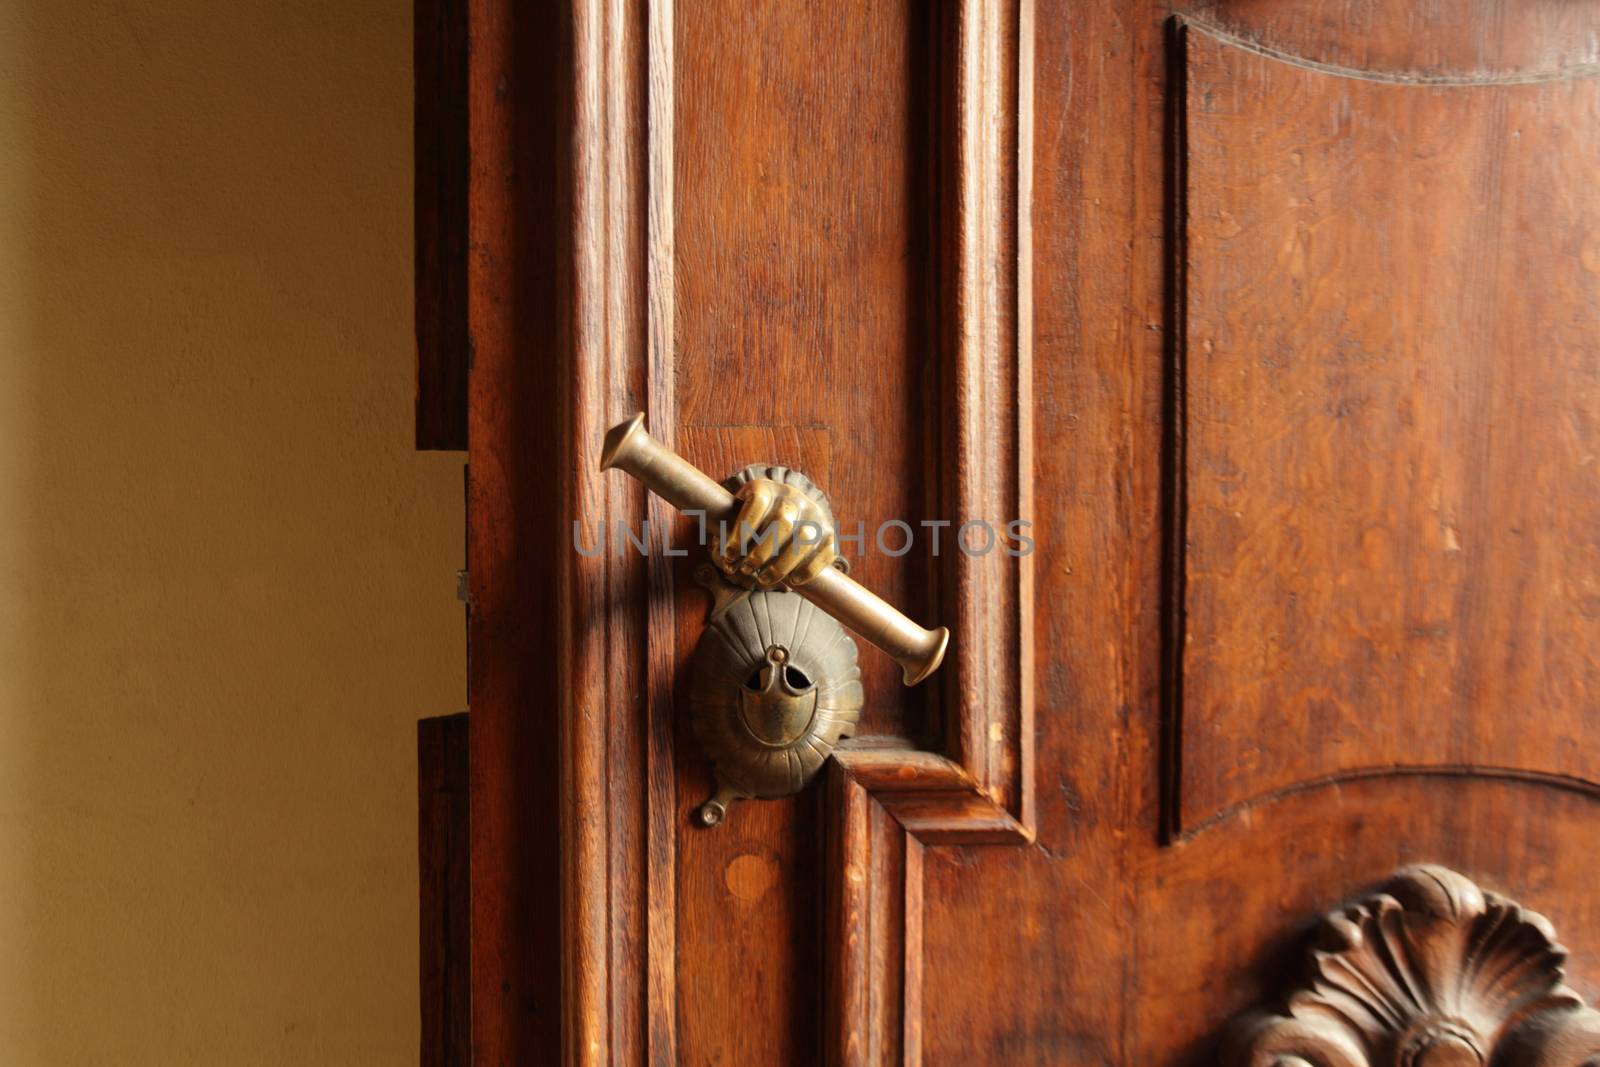 doorknob in the shape of a hand by mrivserg